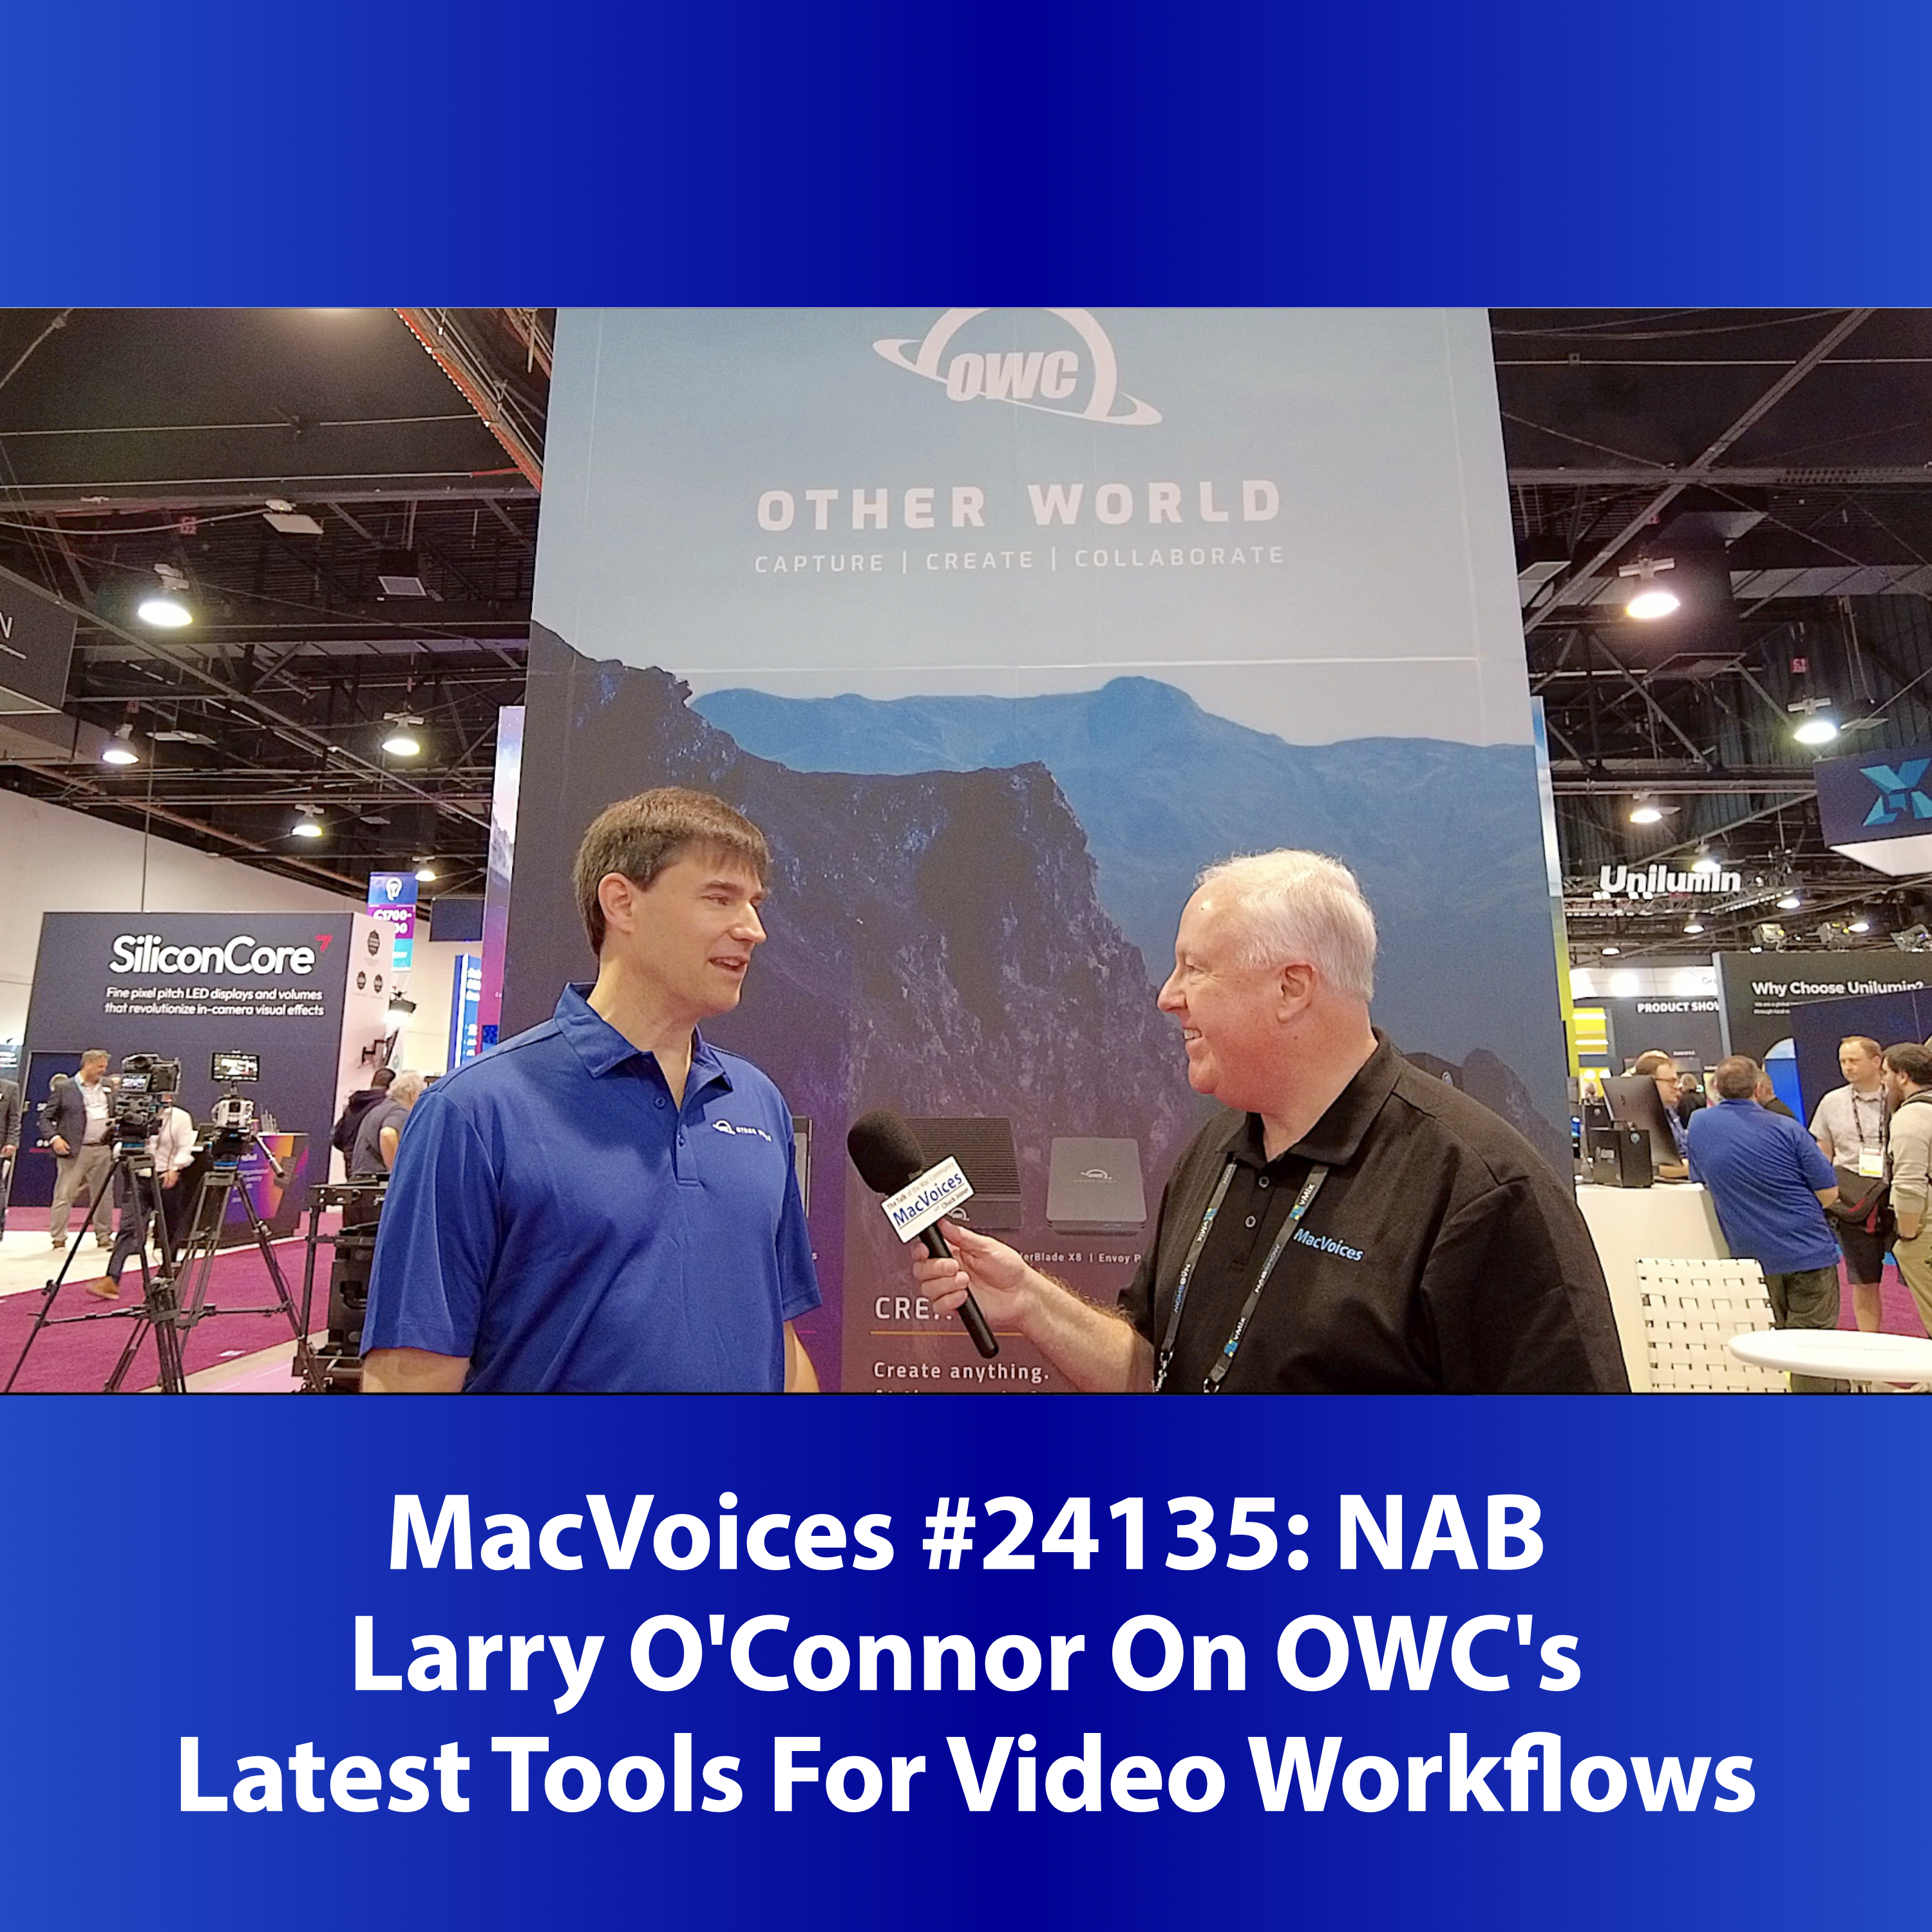 MacVoices #24135: NAB - Larry O'Connor On OWC's Latest Tools For Video Workflows